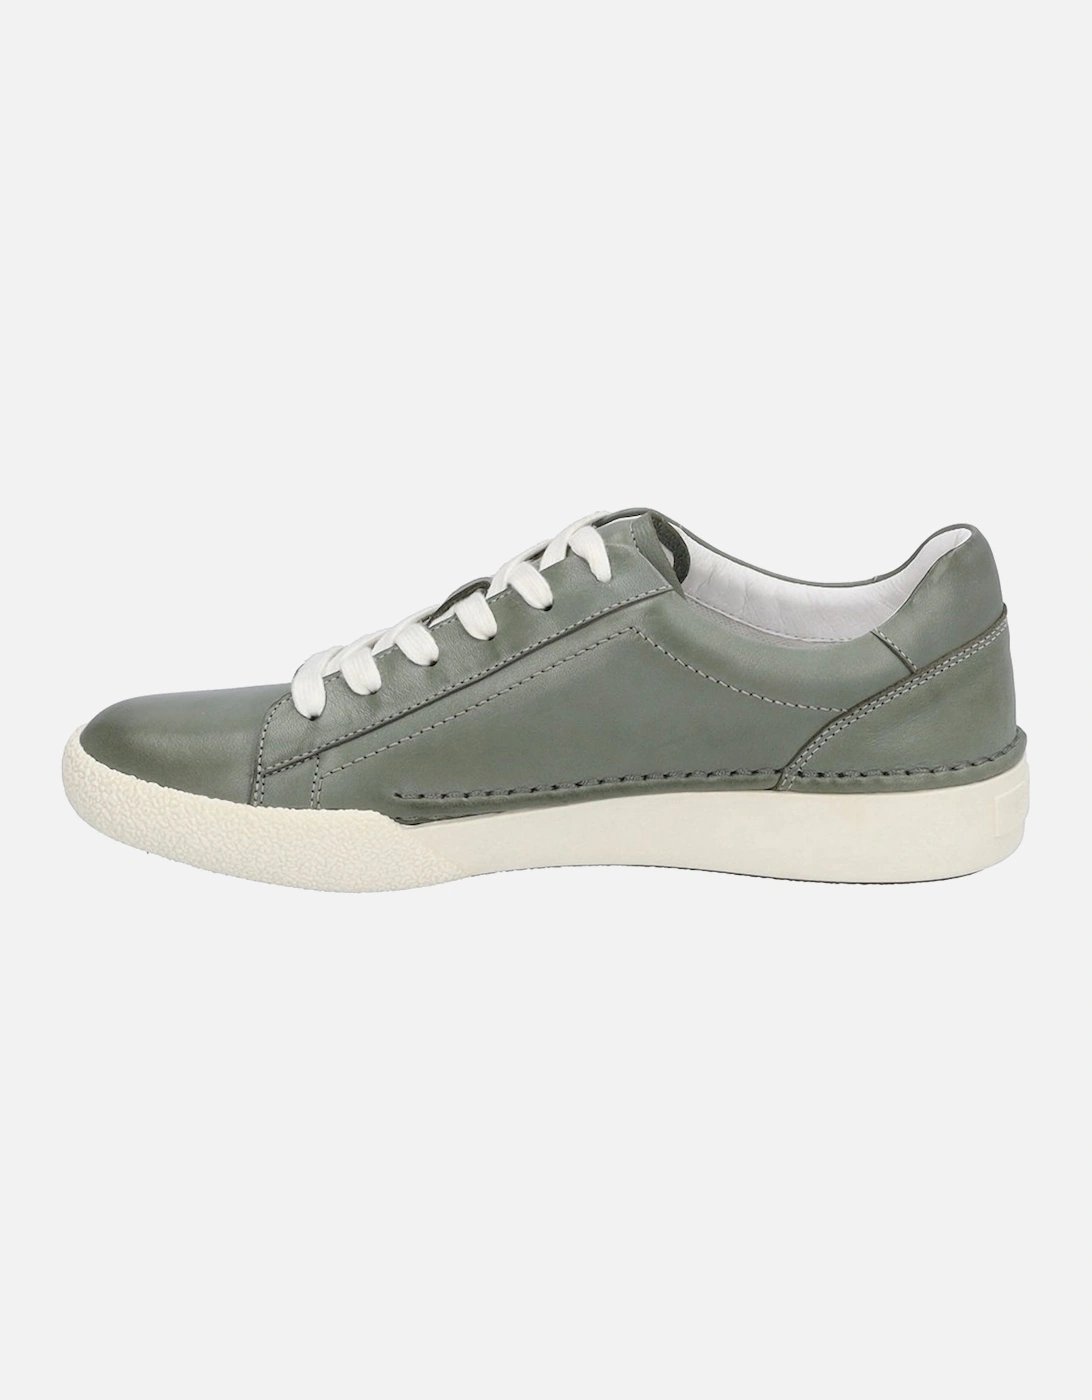 Claire 01 Womens Trainers